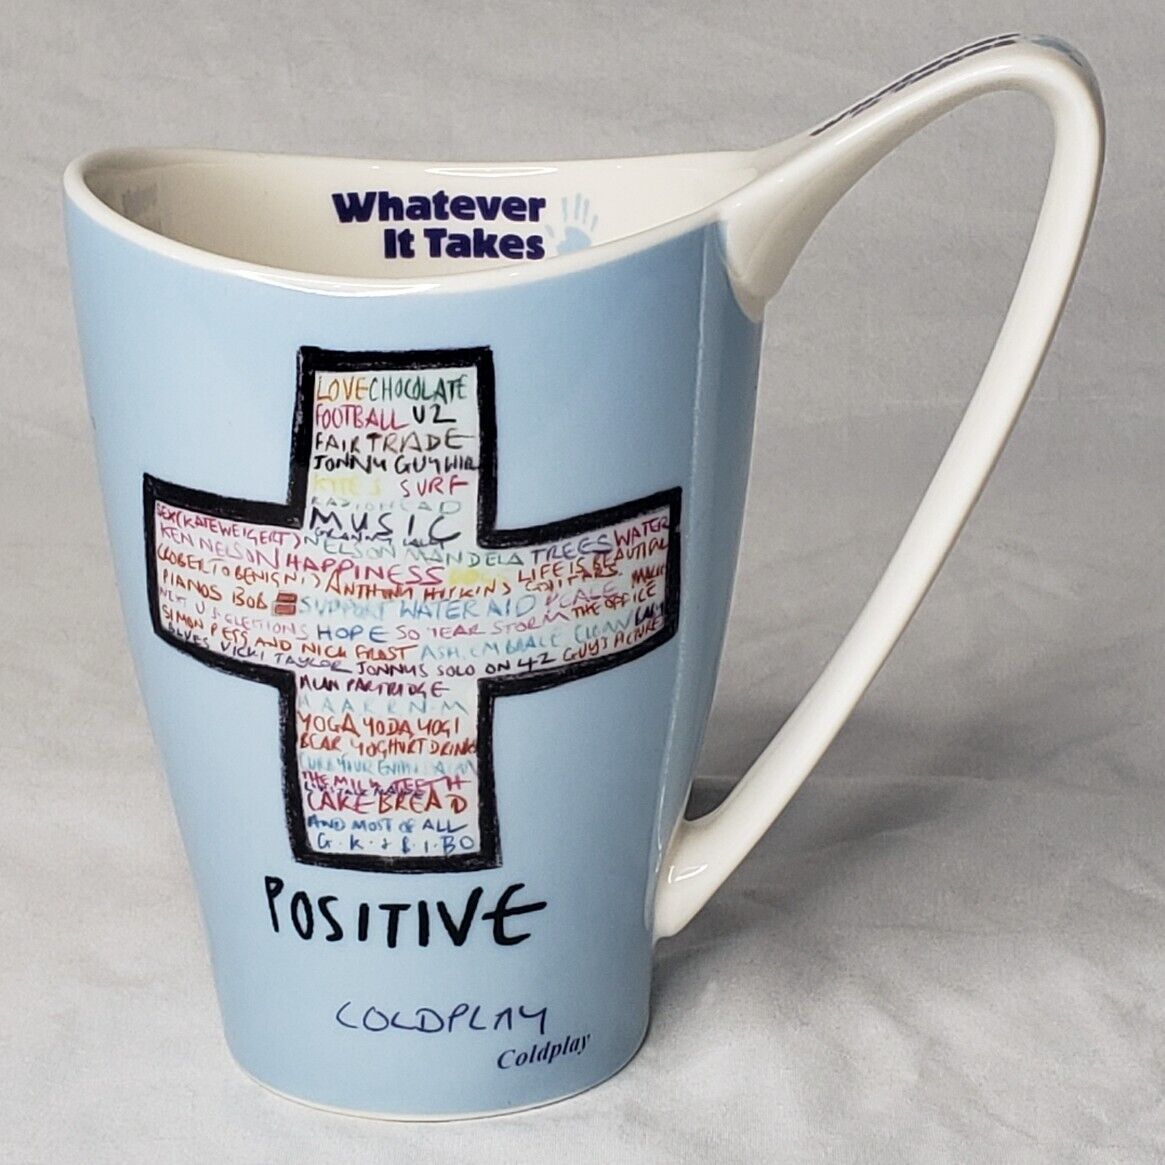 COLDPLAY Positive Tall Mug ~ Whatever it Takes Churchill